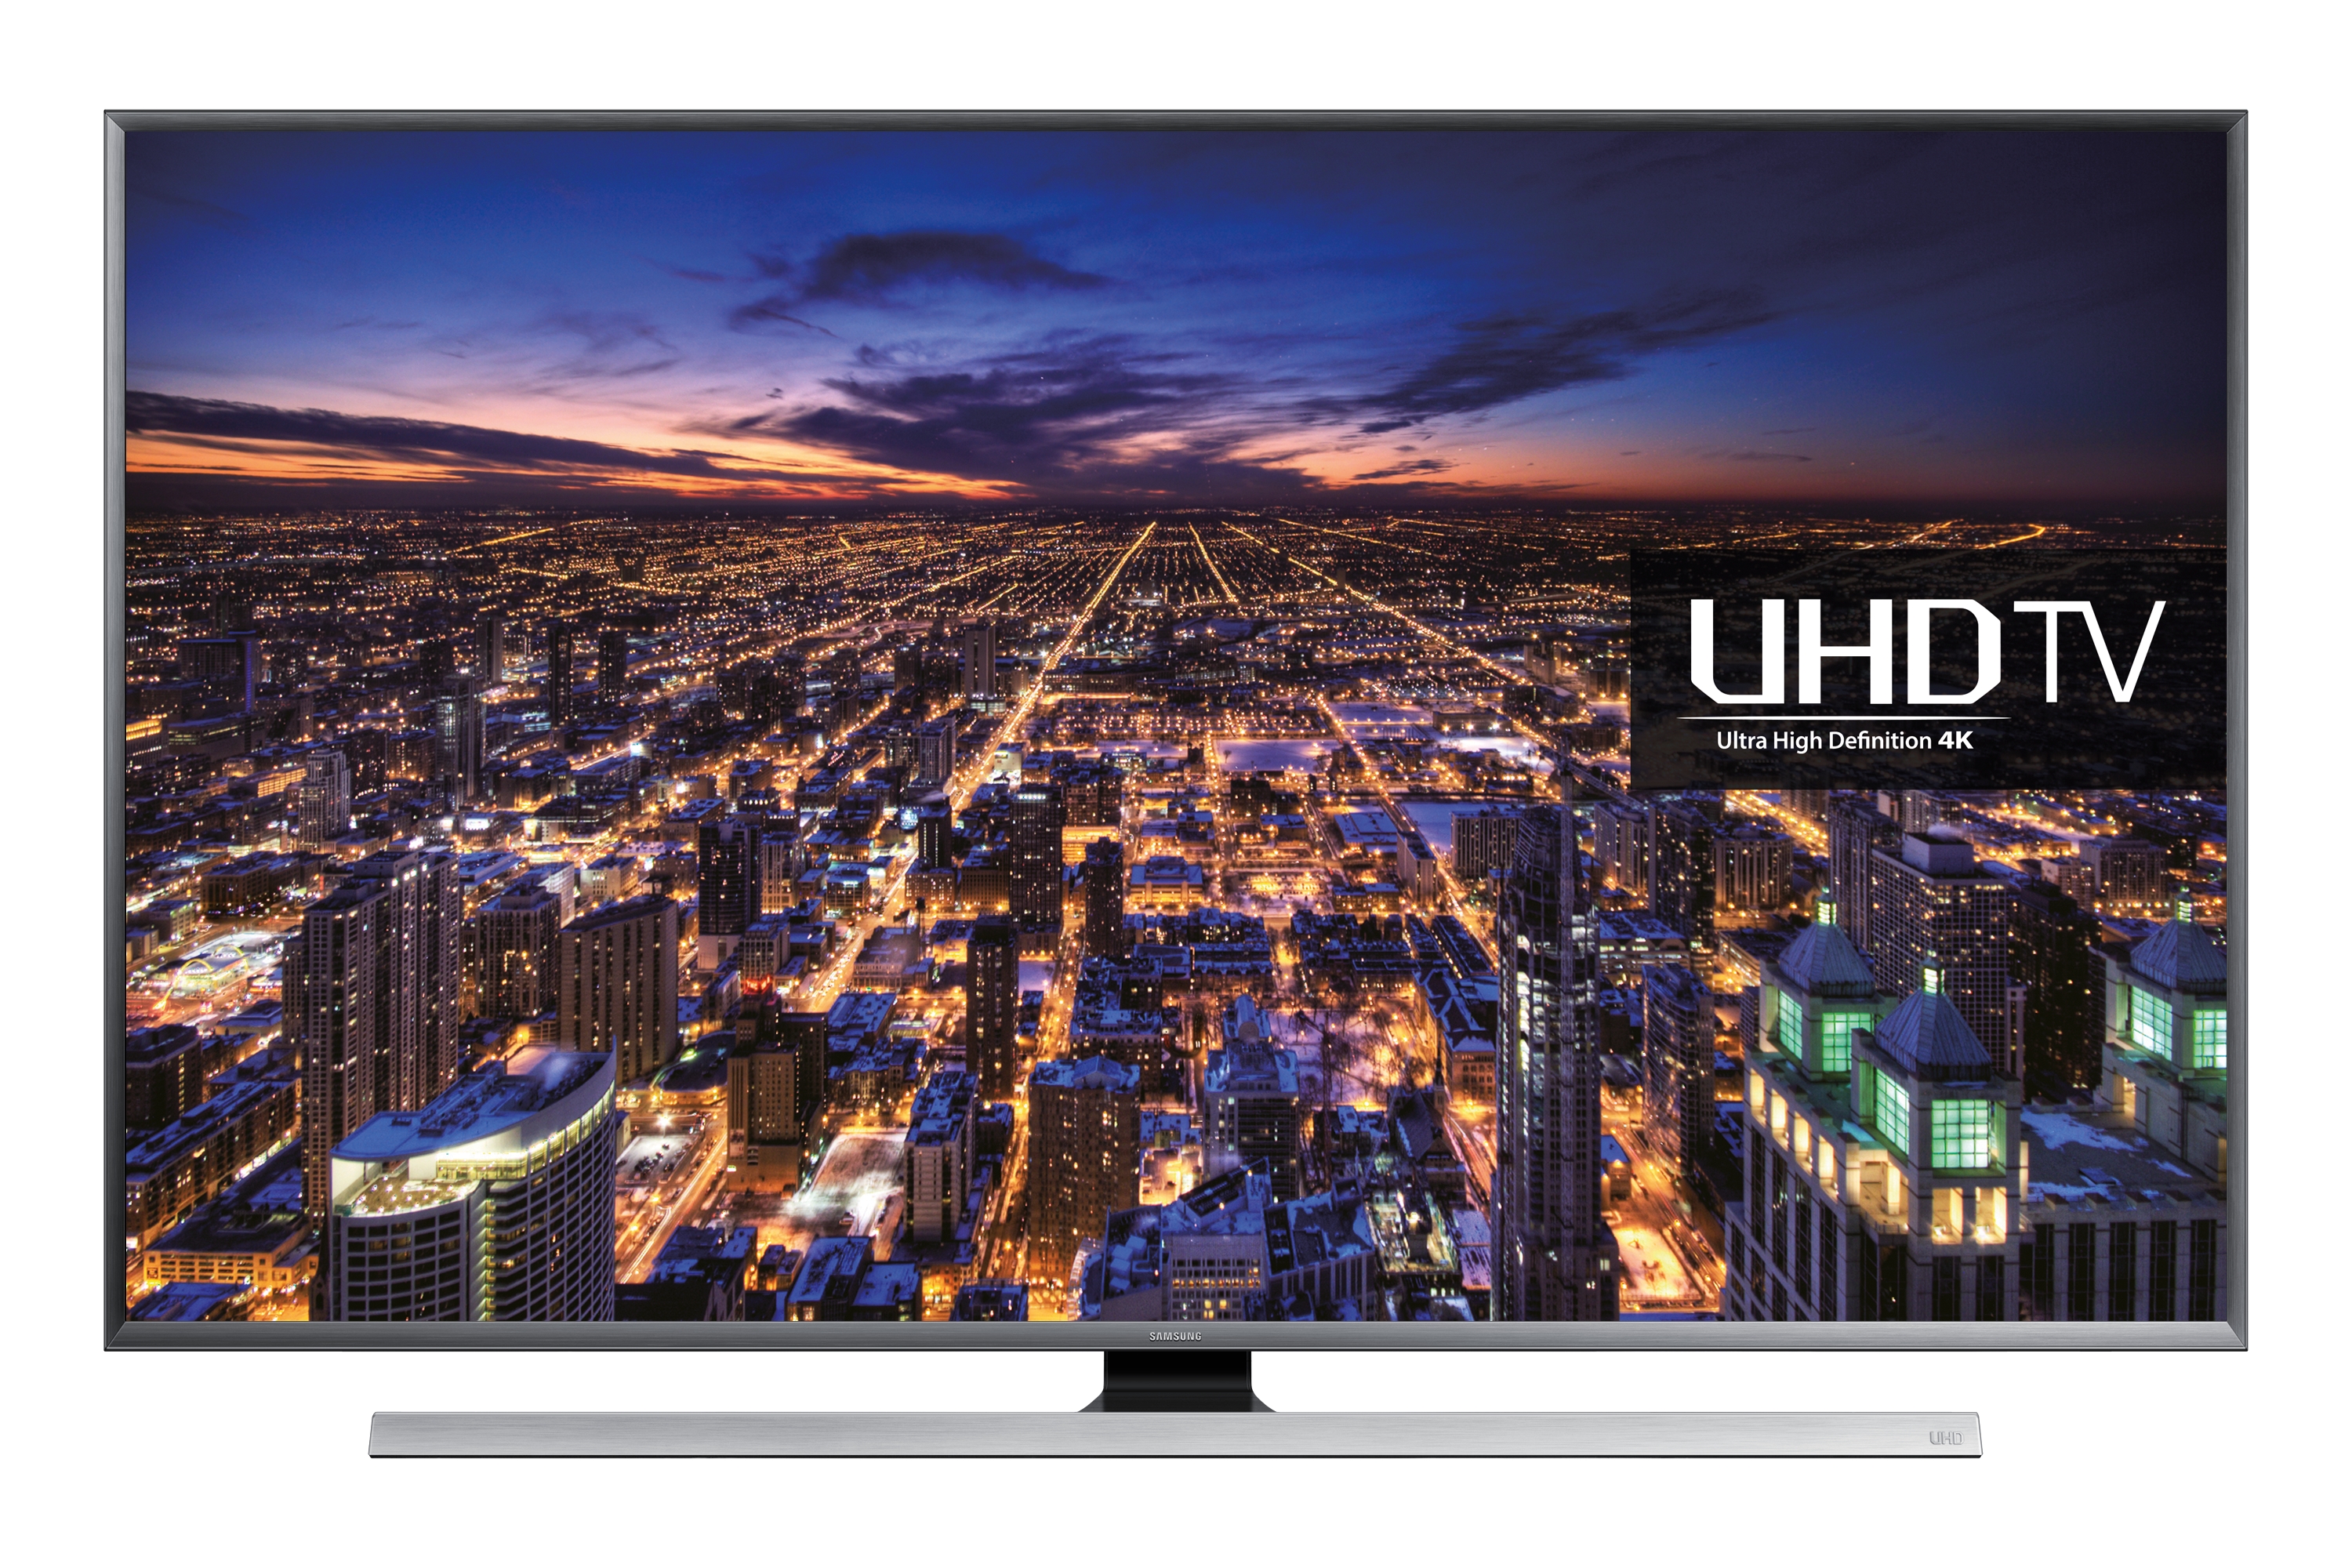  inch uhd k. Television clipart 80 tv